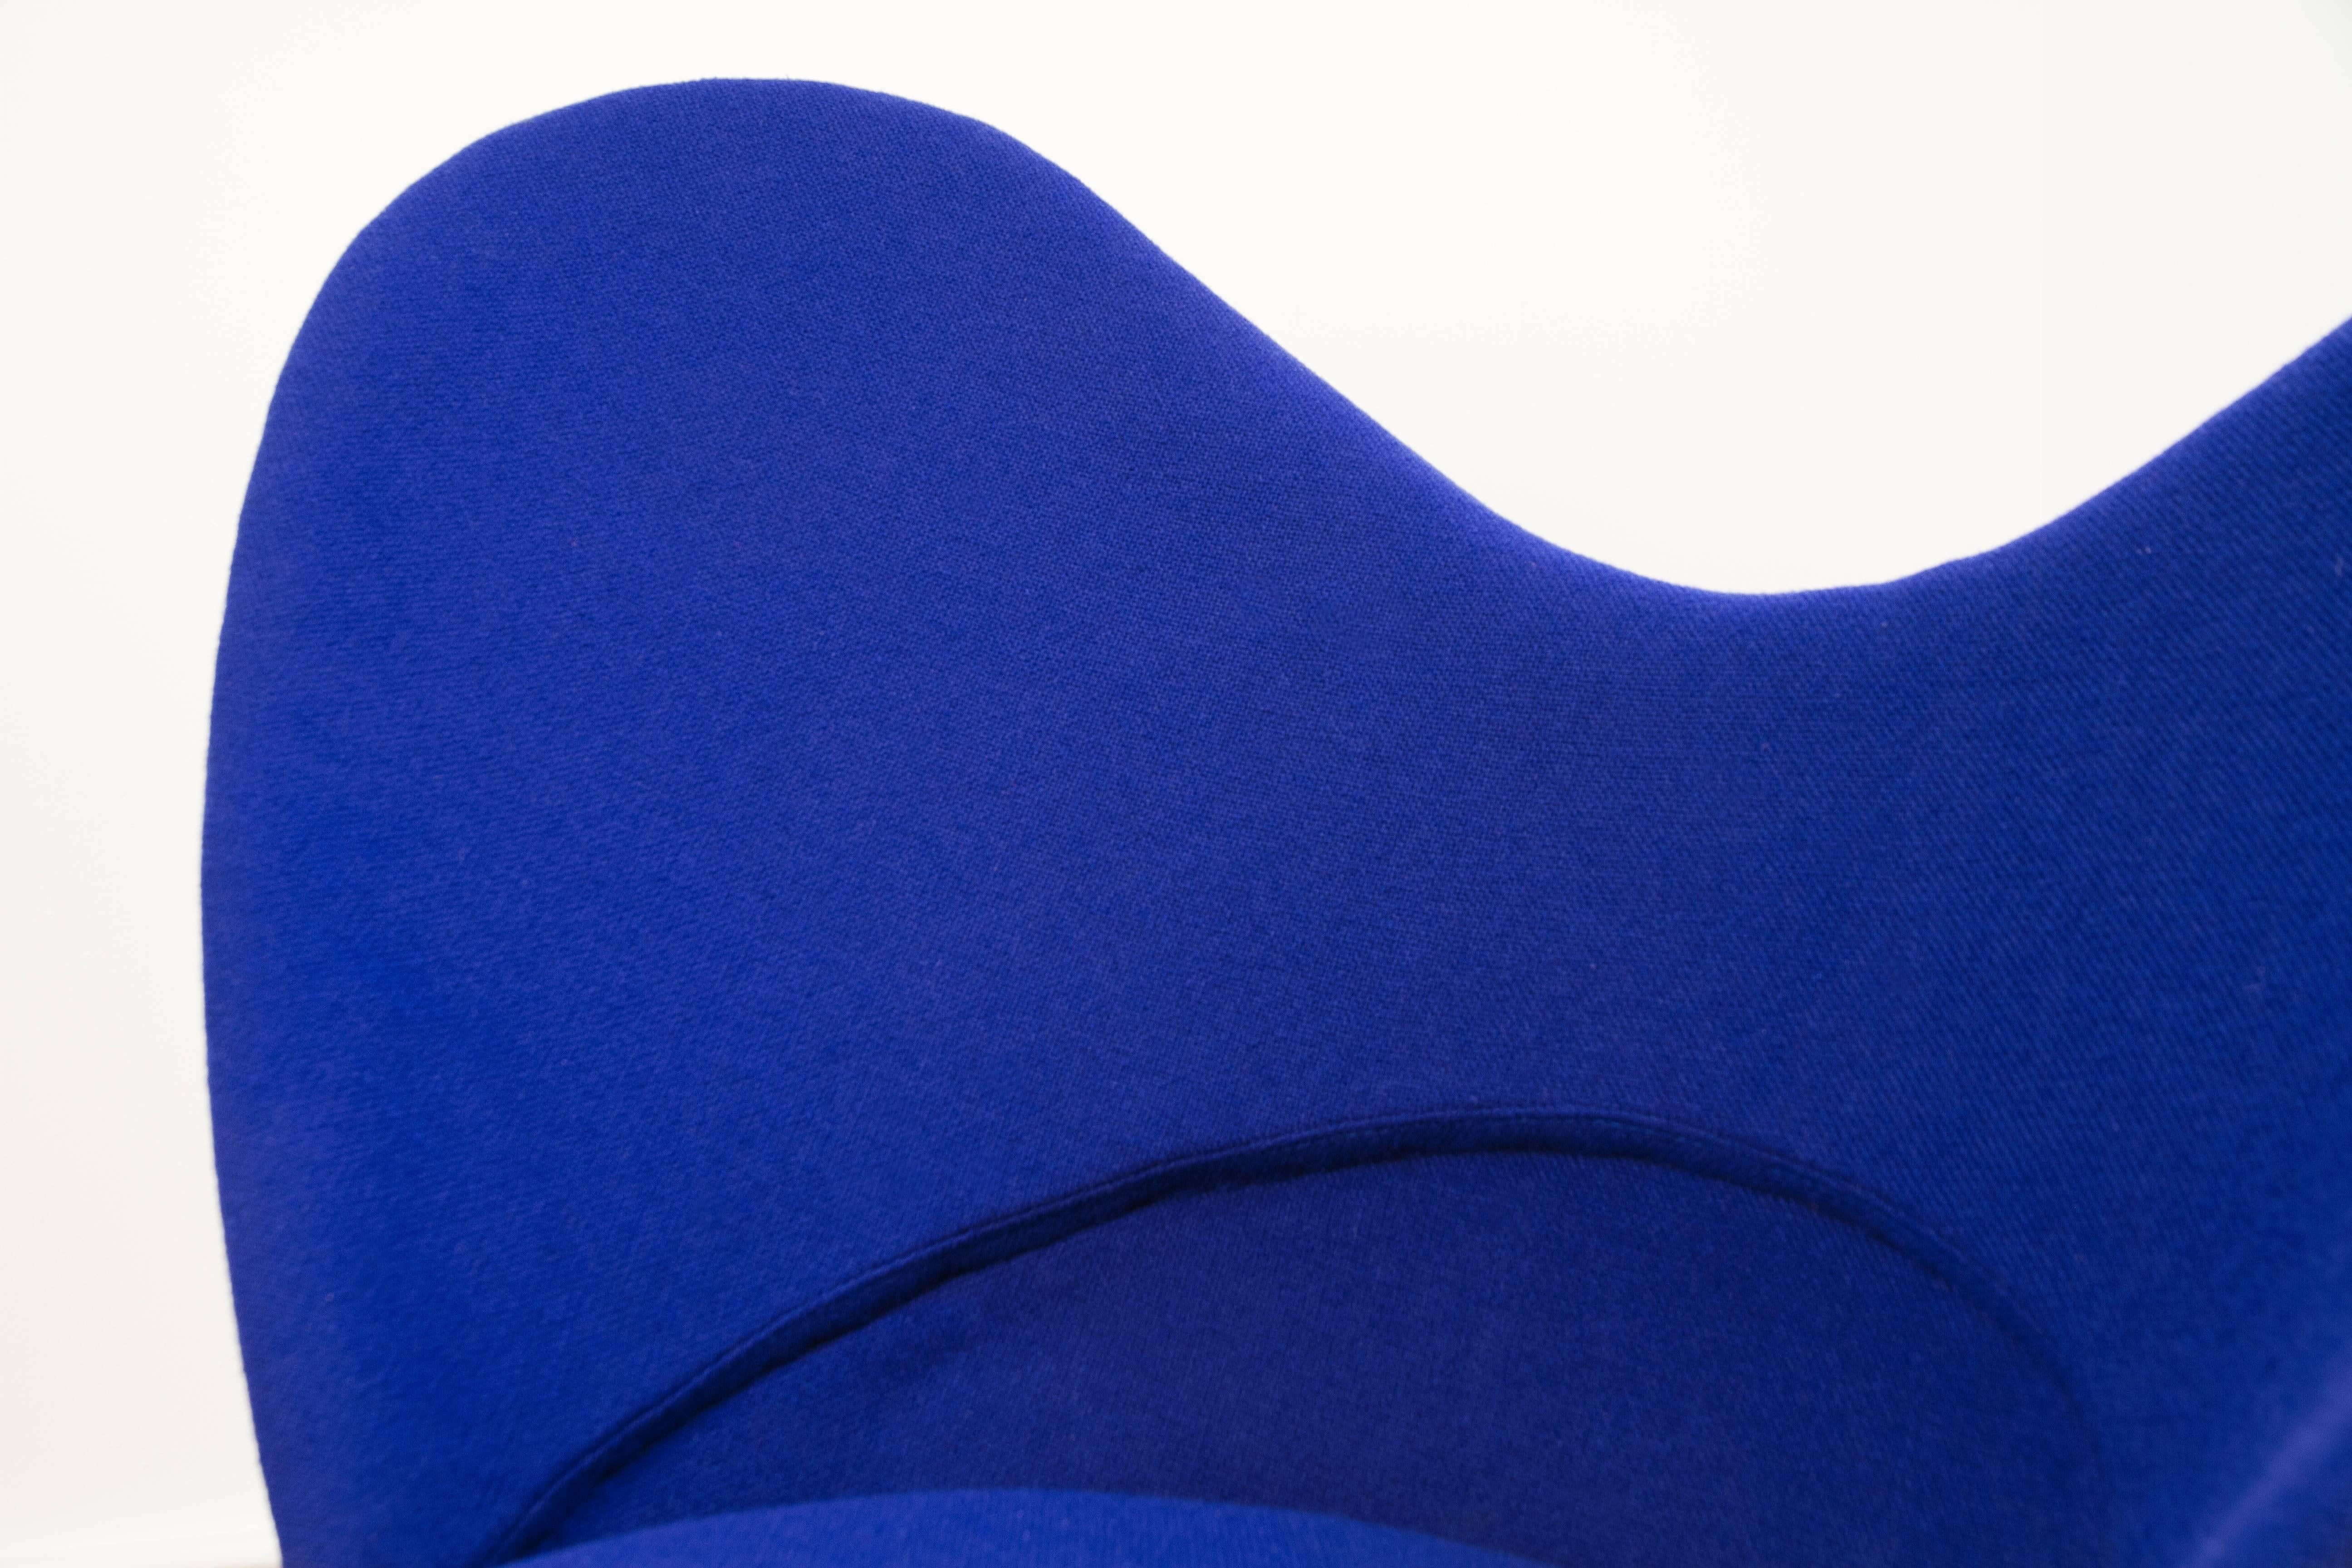 Original Heart chair designed by Verner Panton in 1950s made with metal chrome and electric blue upholstery by Kvadrat in Denmark.